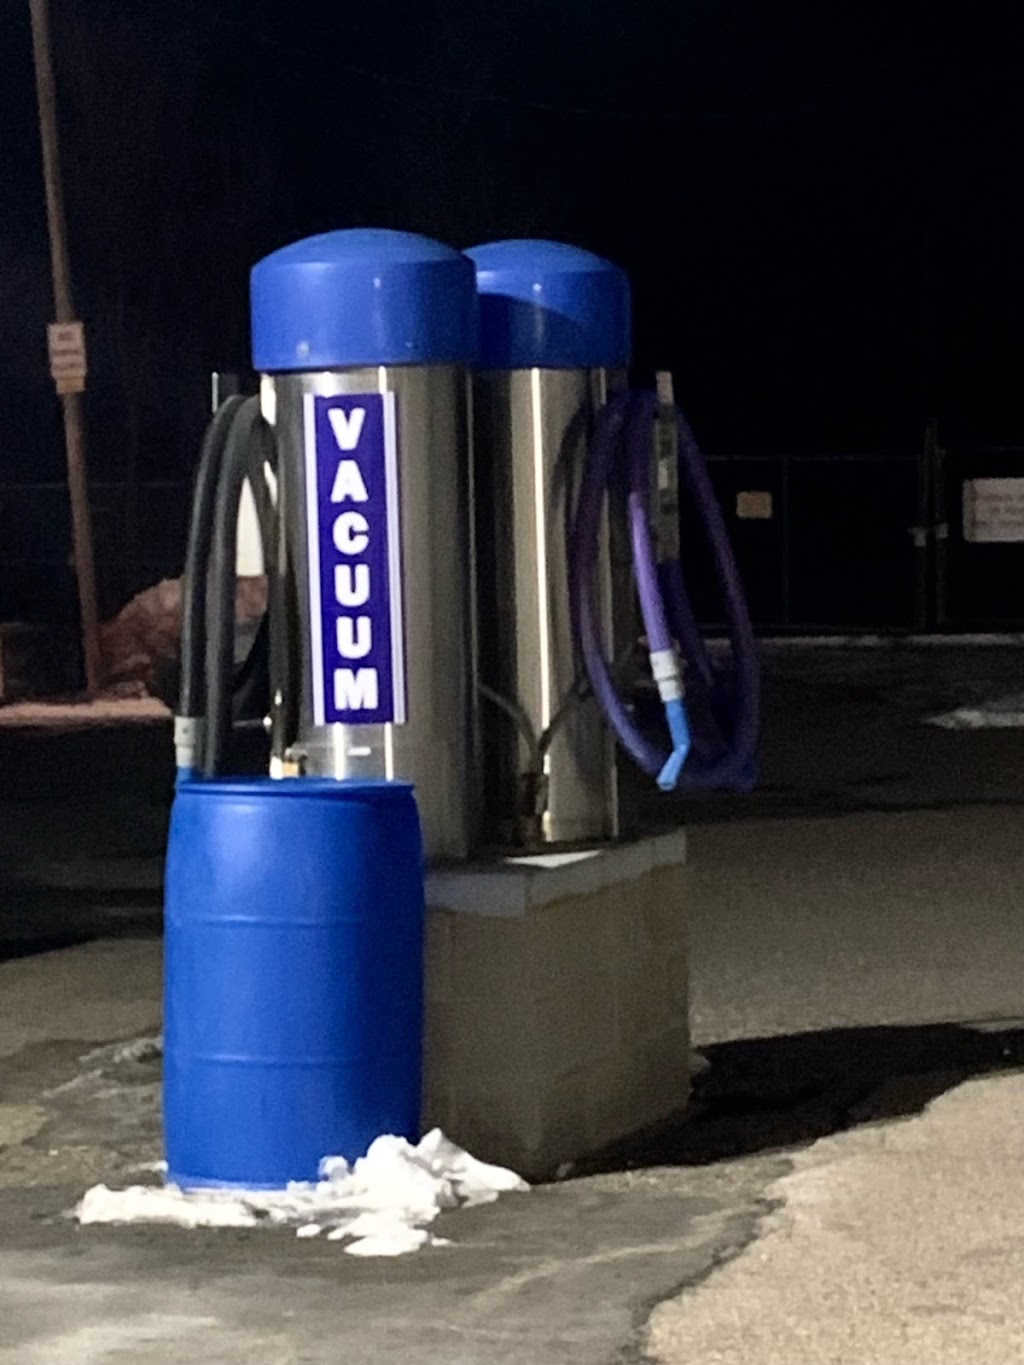 Magic Touch Self Service Car Wash | 2127 Vermillion St, Hastings, MN 55033 | Phone: (651) 343-3564